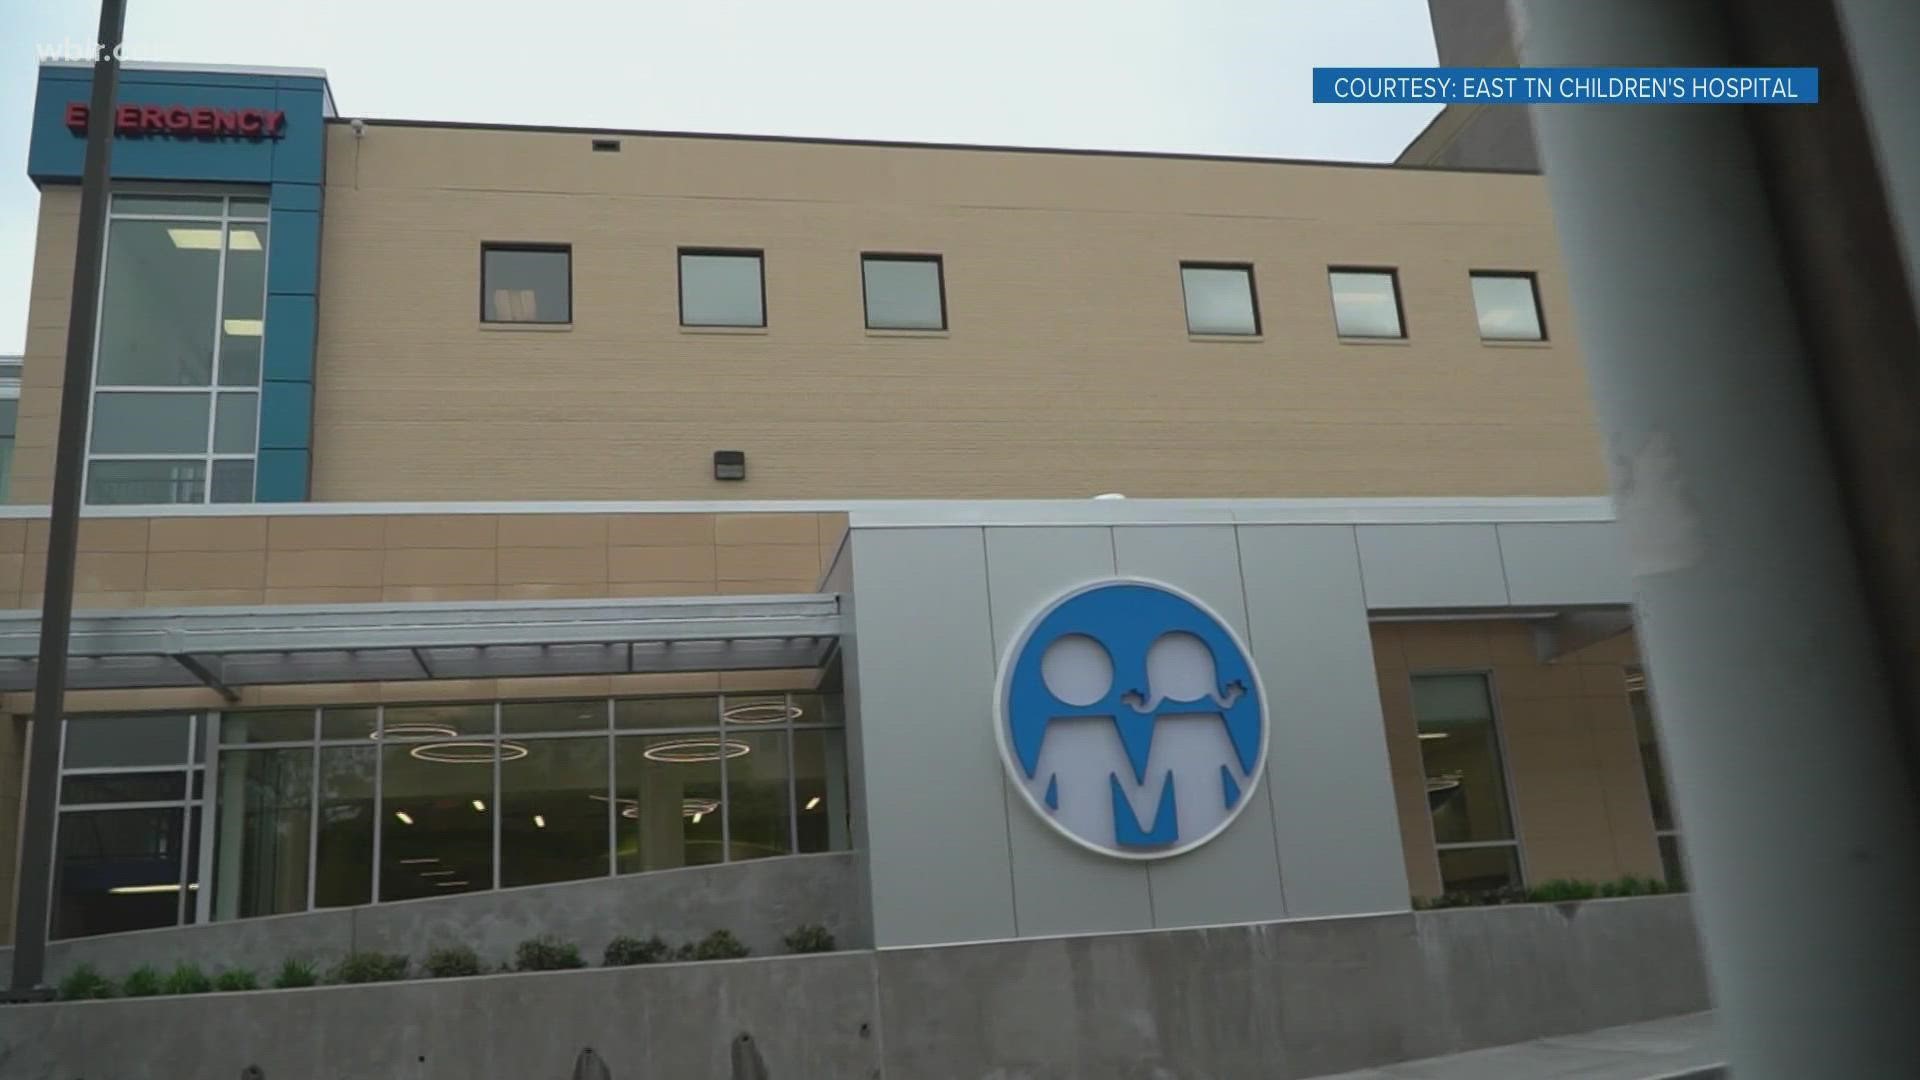 The McNabb Center opened a crisis stabilization unit at East Tennessee Children's Hospital to provide mental health care for children.